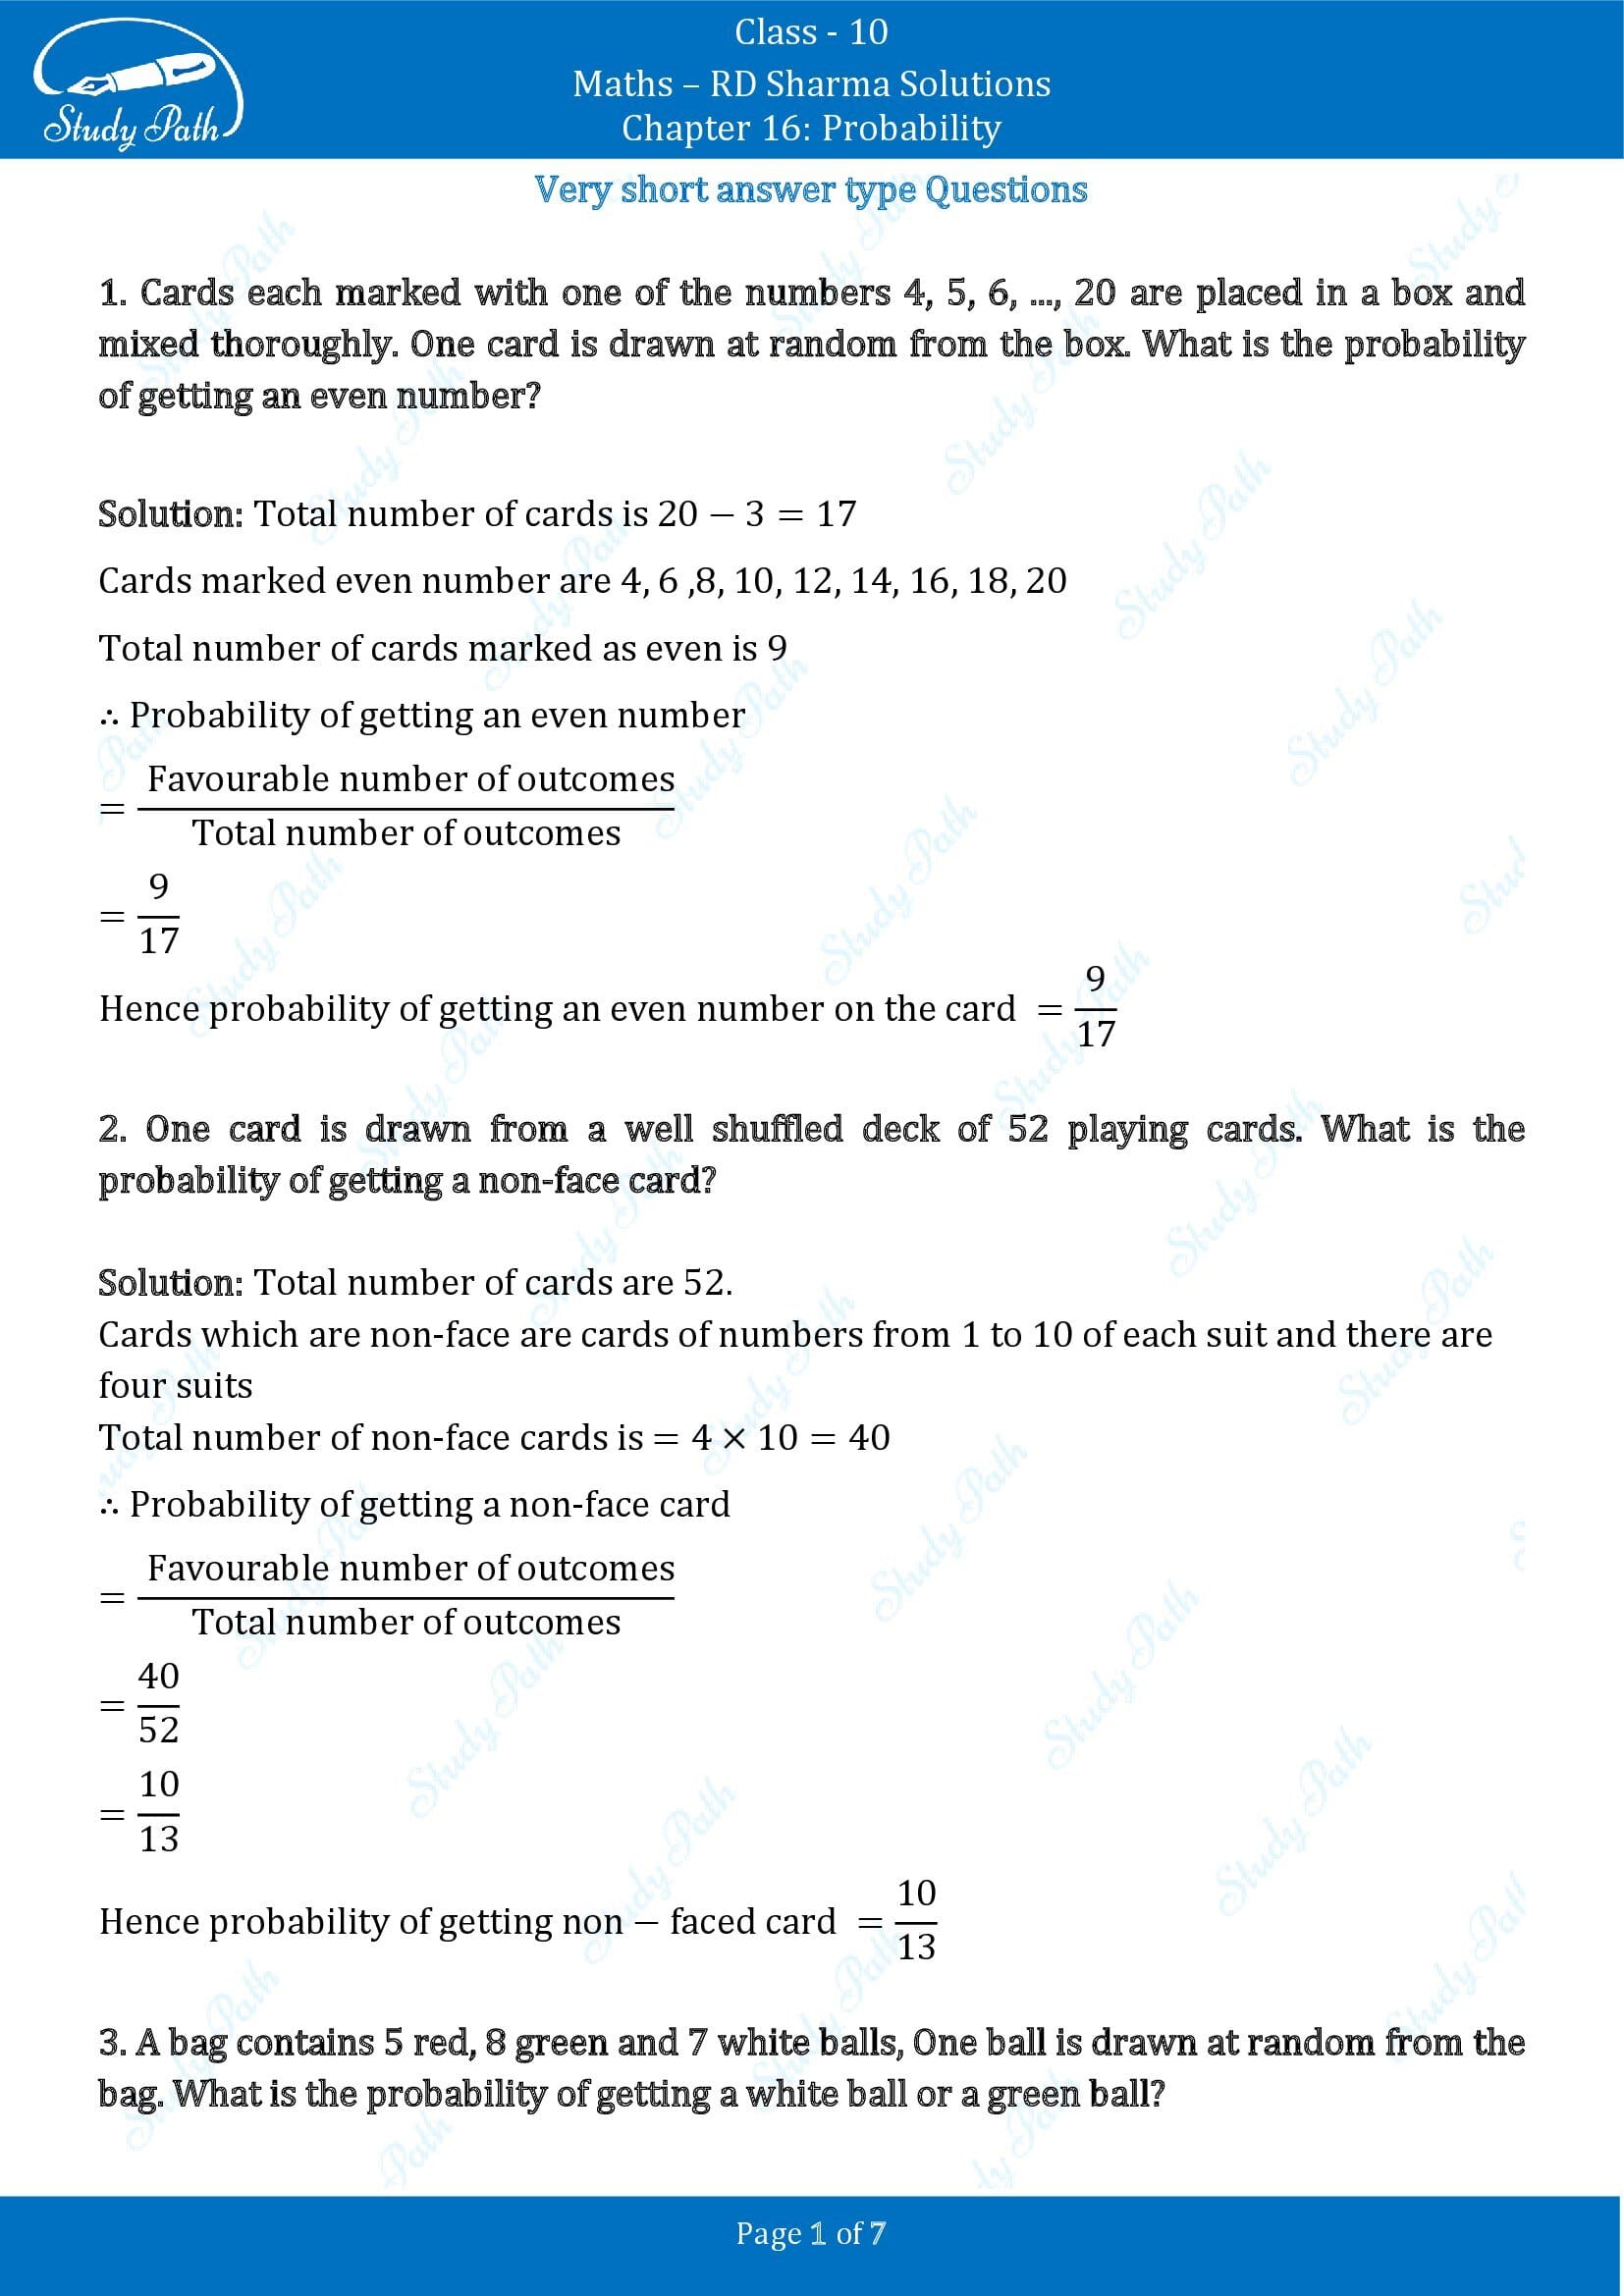 RD Sharma Solutions Class 10 Chapter 16 Probability Very Short Answer Type Questions VSAQs 00001